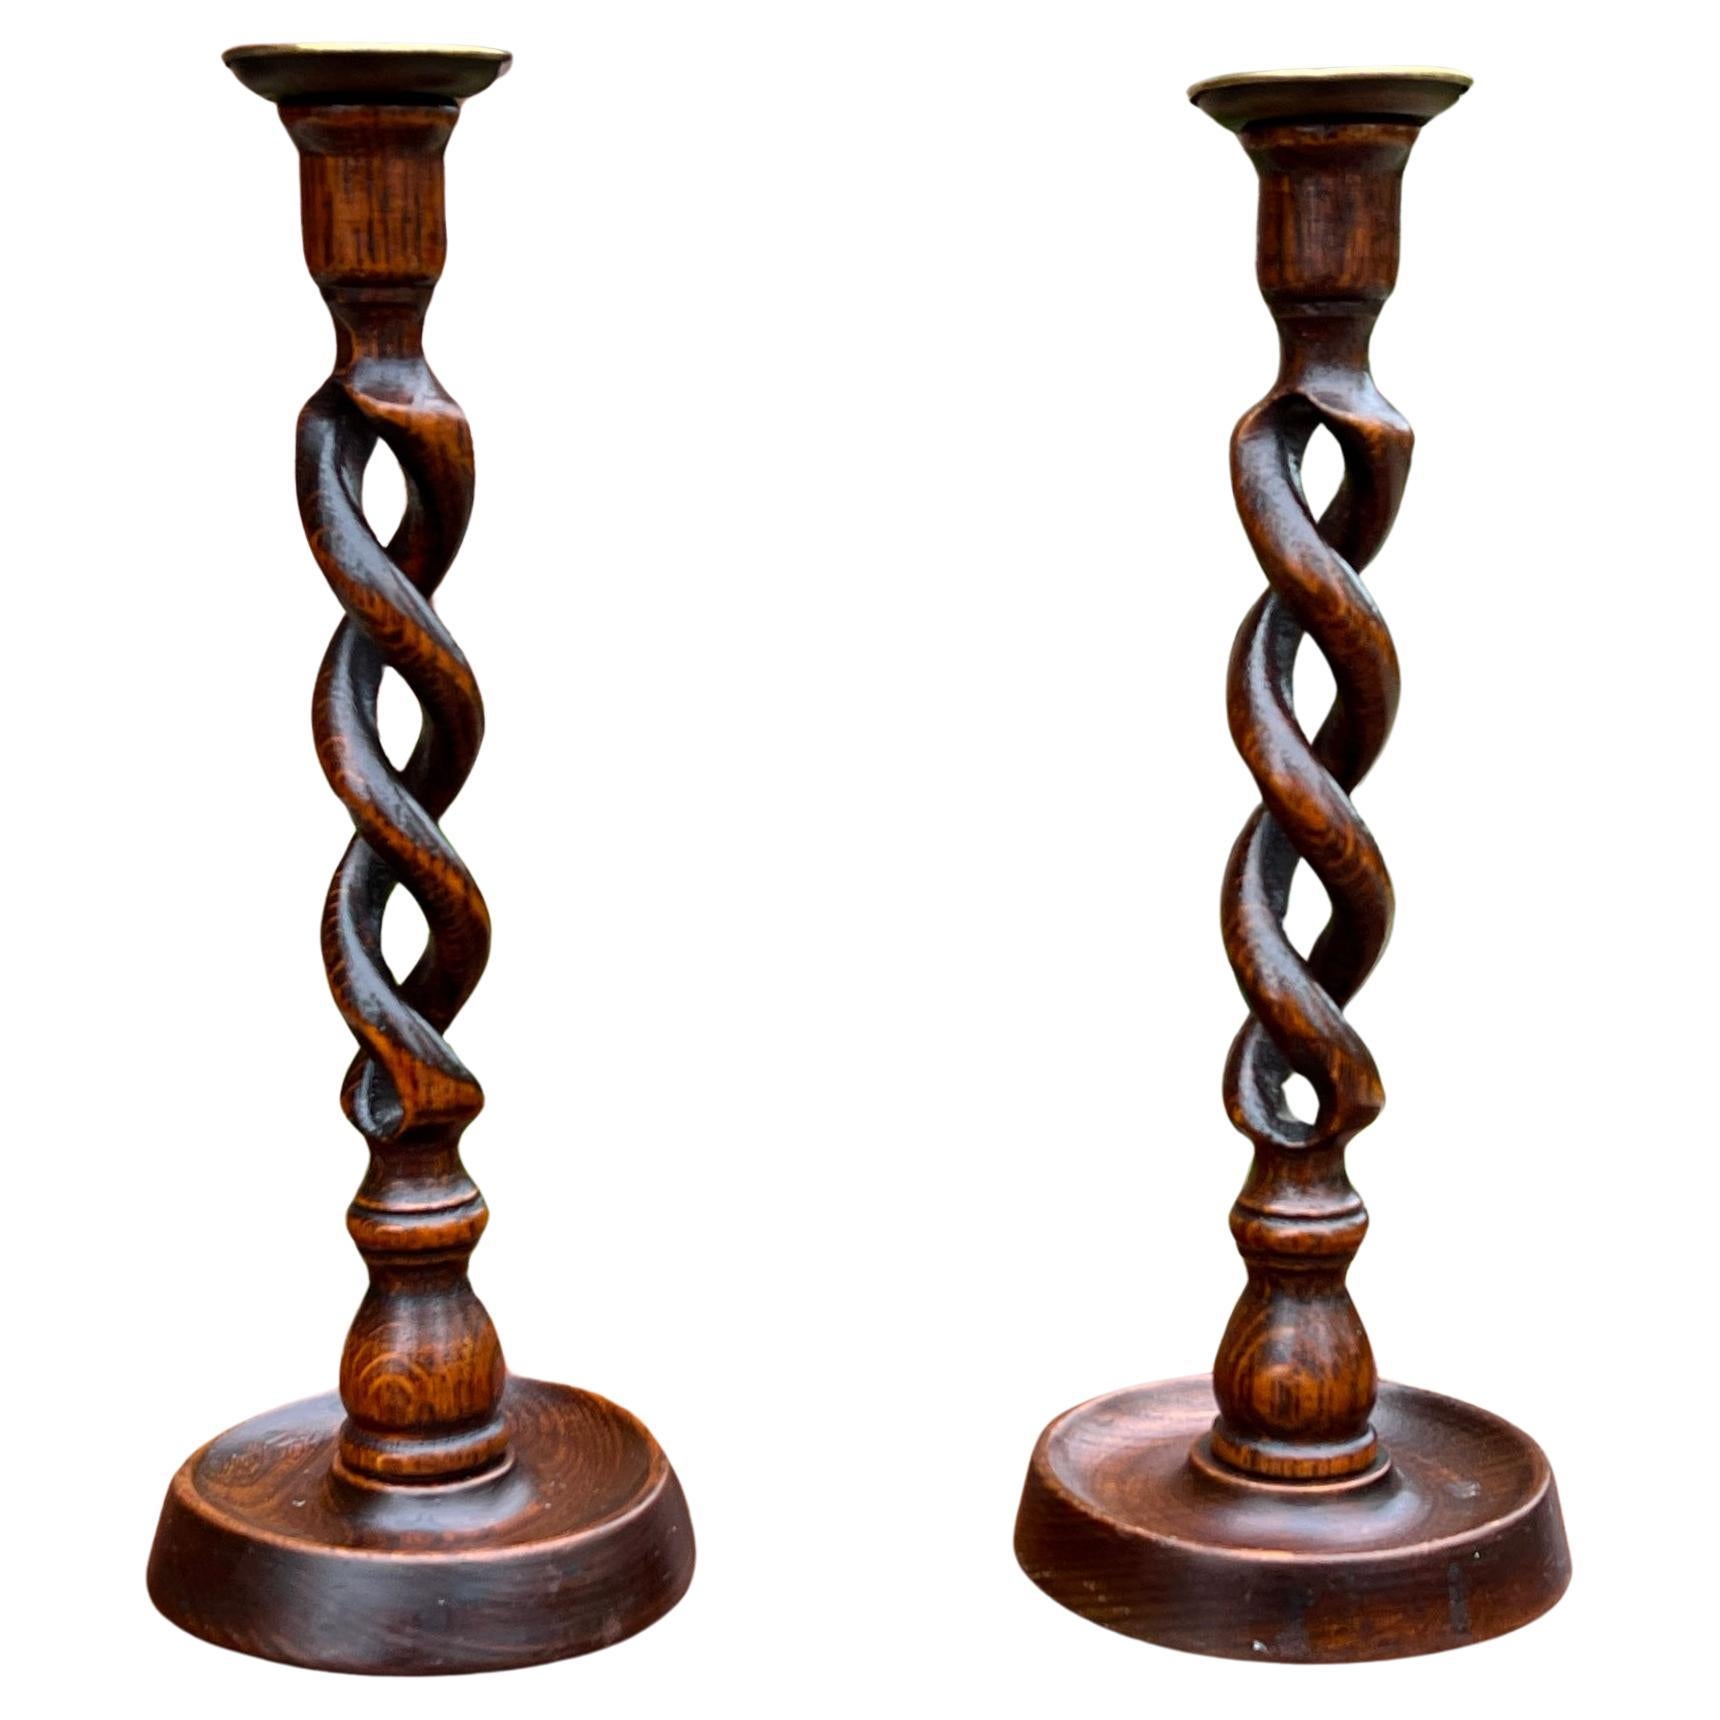 What is an old-fashioned candle holder called?